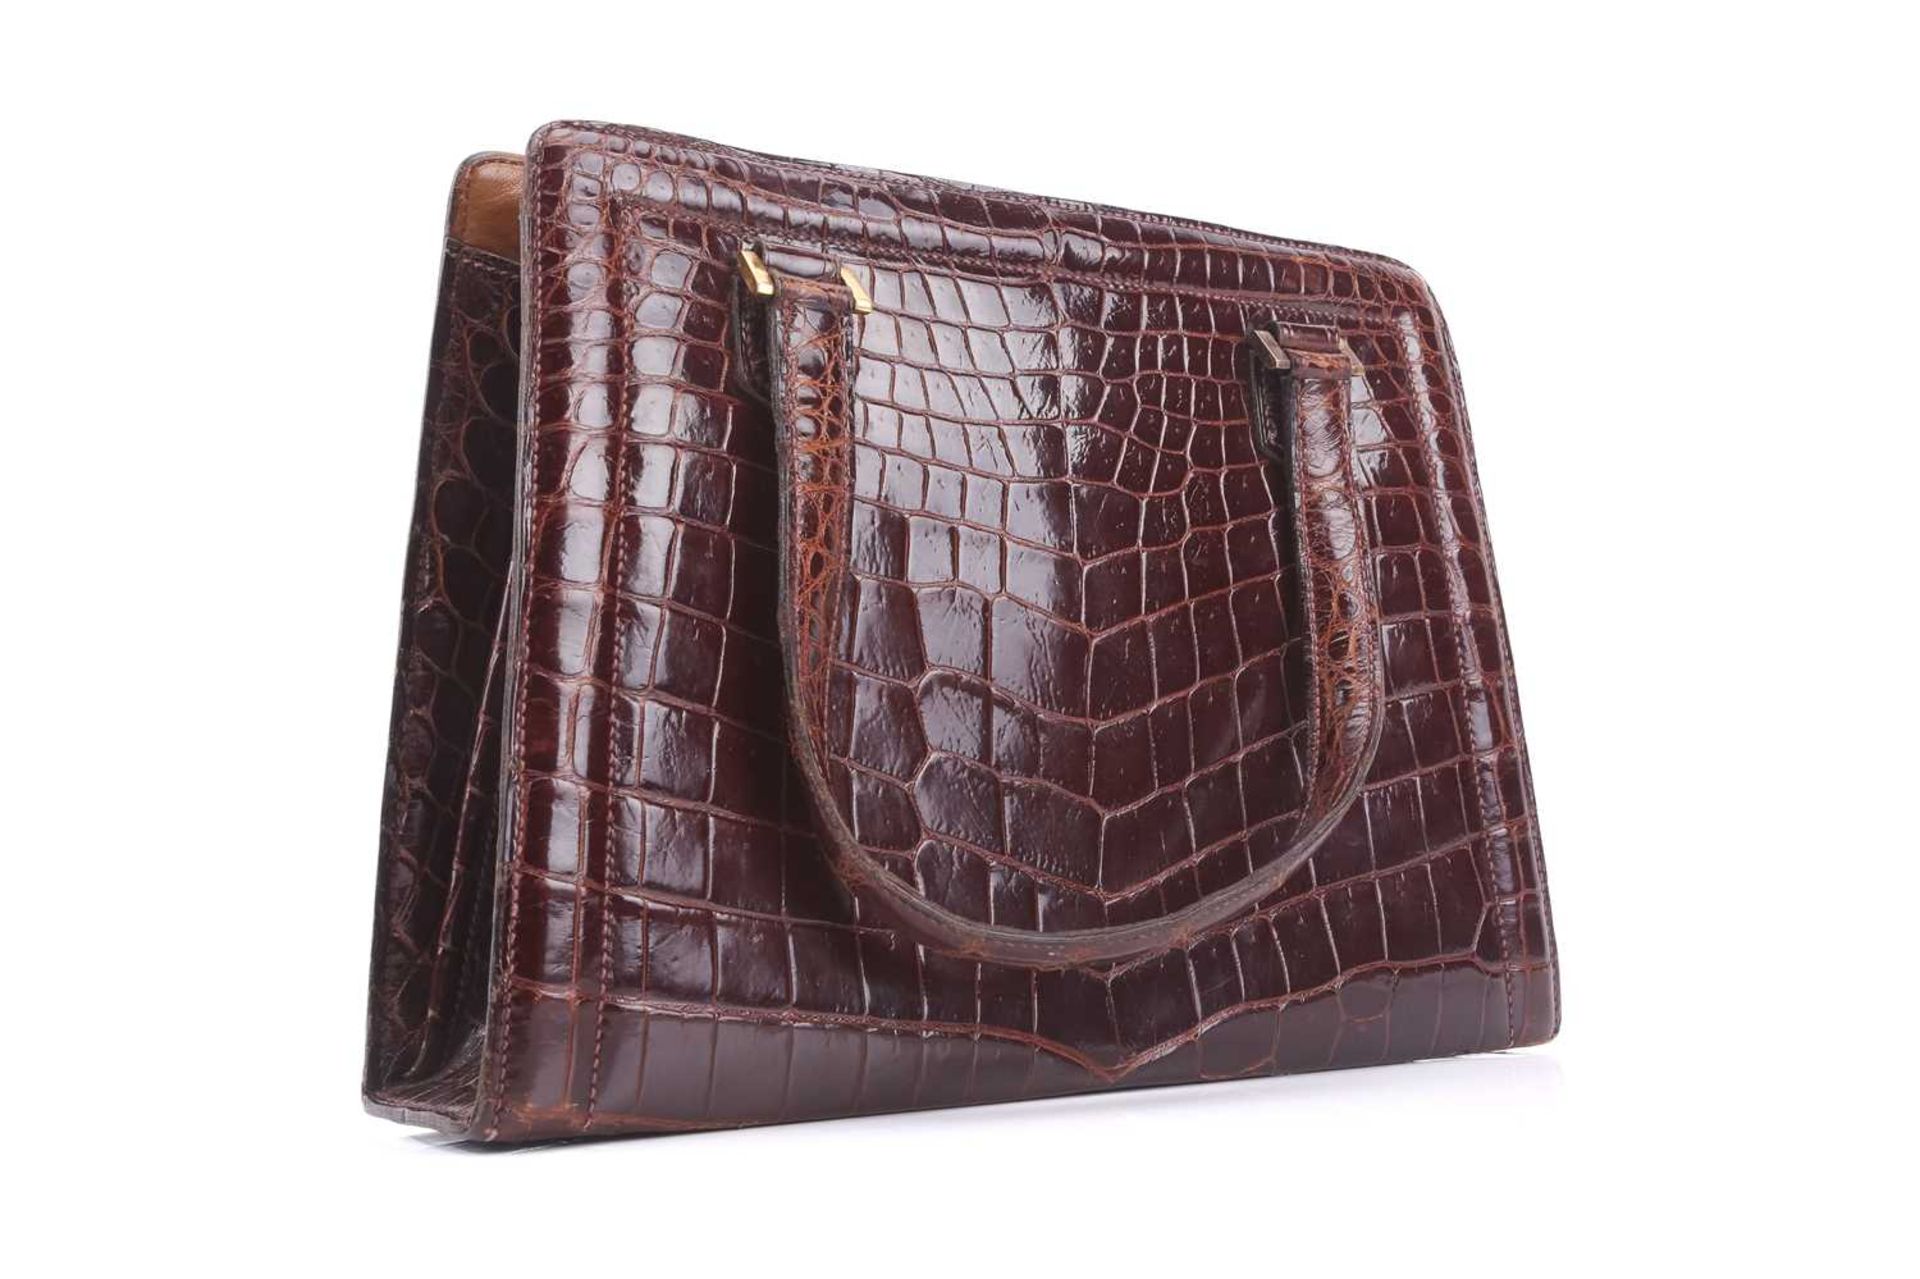 Hermès - a 'Pullman' handbag in brown crocodile skin, circa late 1930, a leather-lined structured - Image 3 of 12